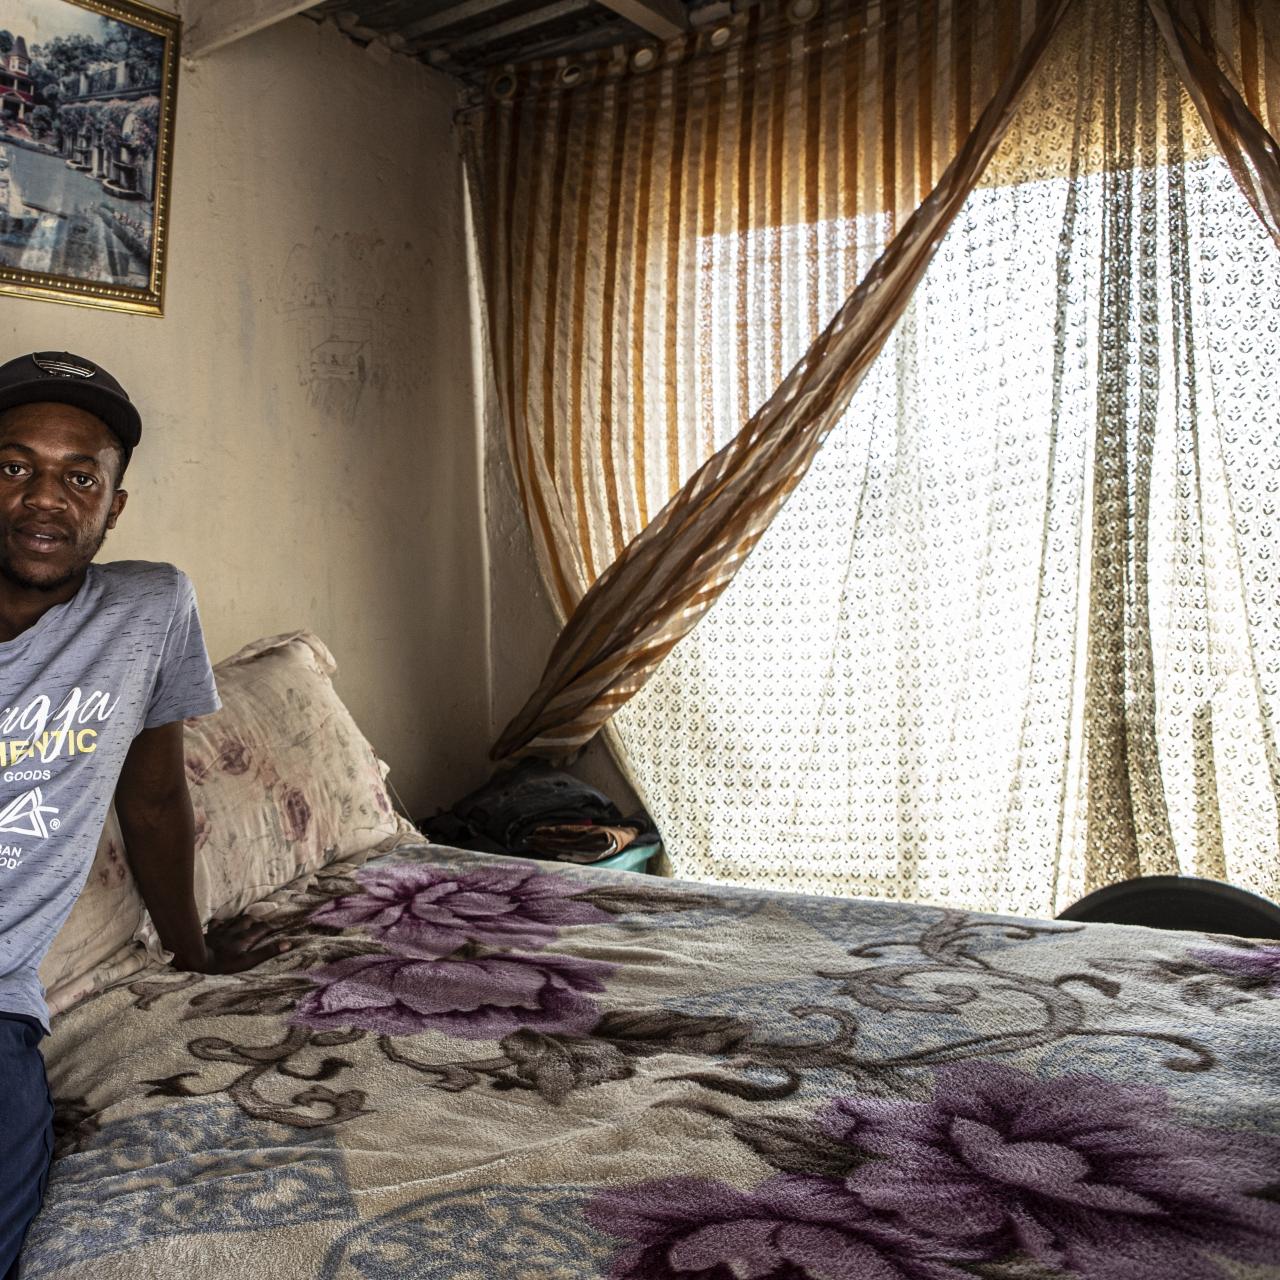 Bheki, a young man in a cap and light blue t-shirt sits on a double bed with floral sheets